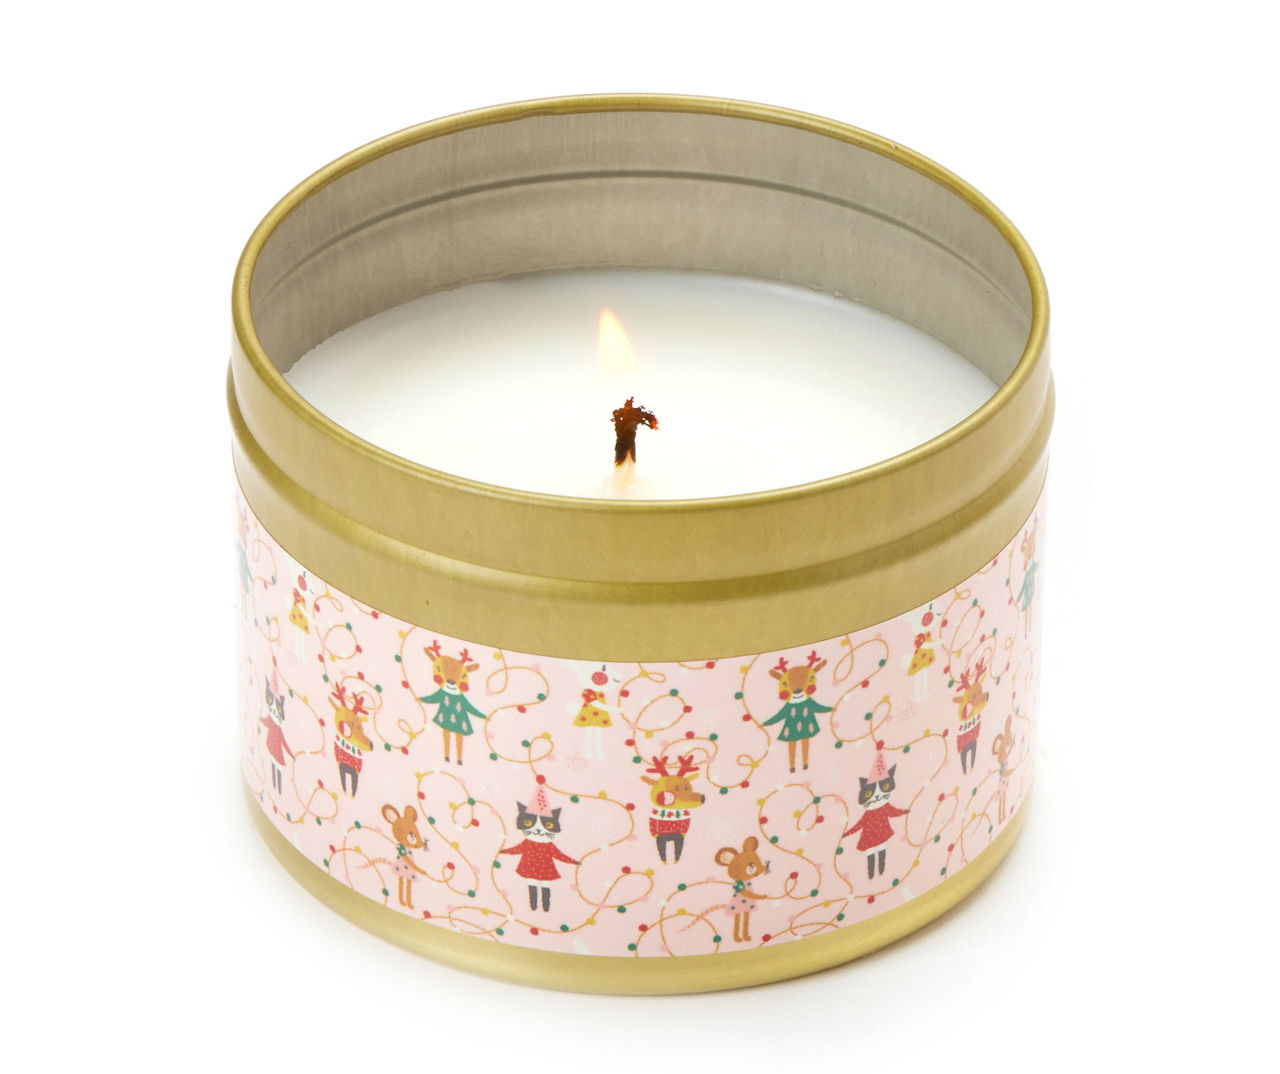 Classic Line Candle — LUX Naturals